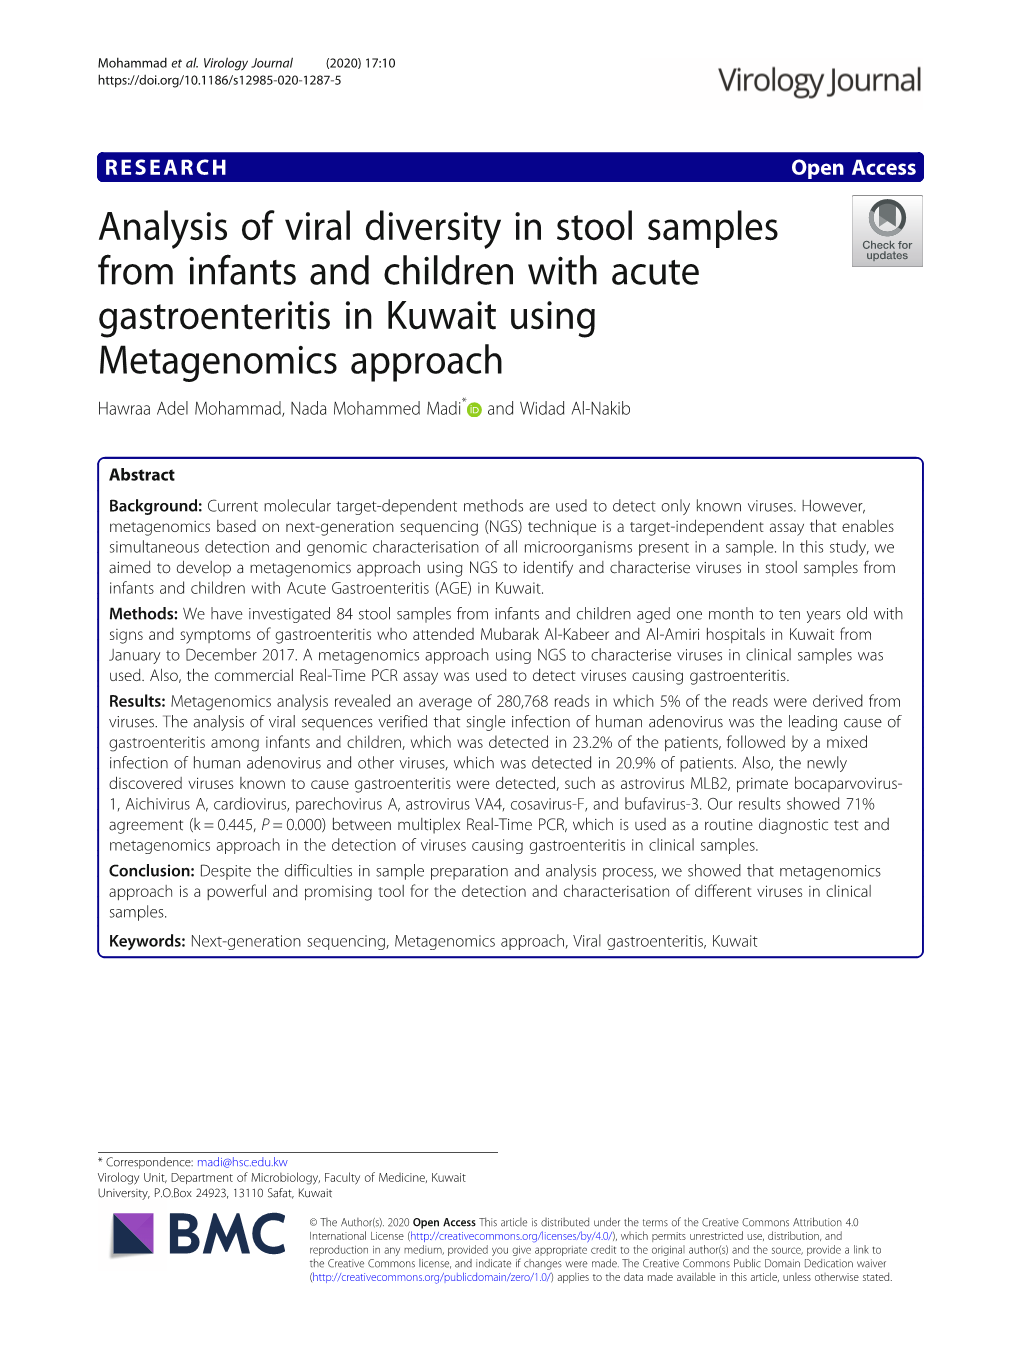 Analysis of Viral Diversity in Stool Samples from Infants and Children